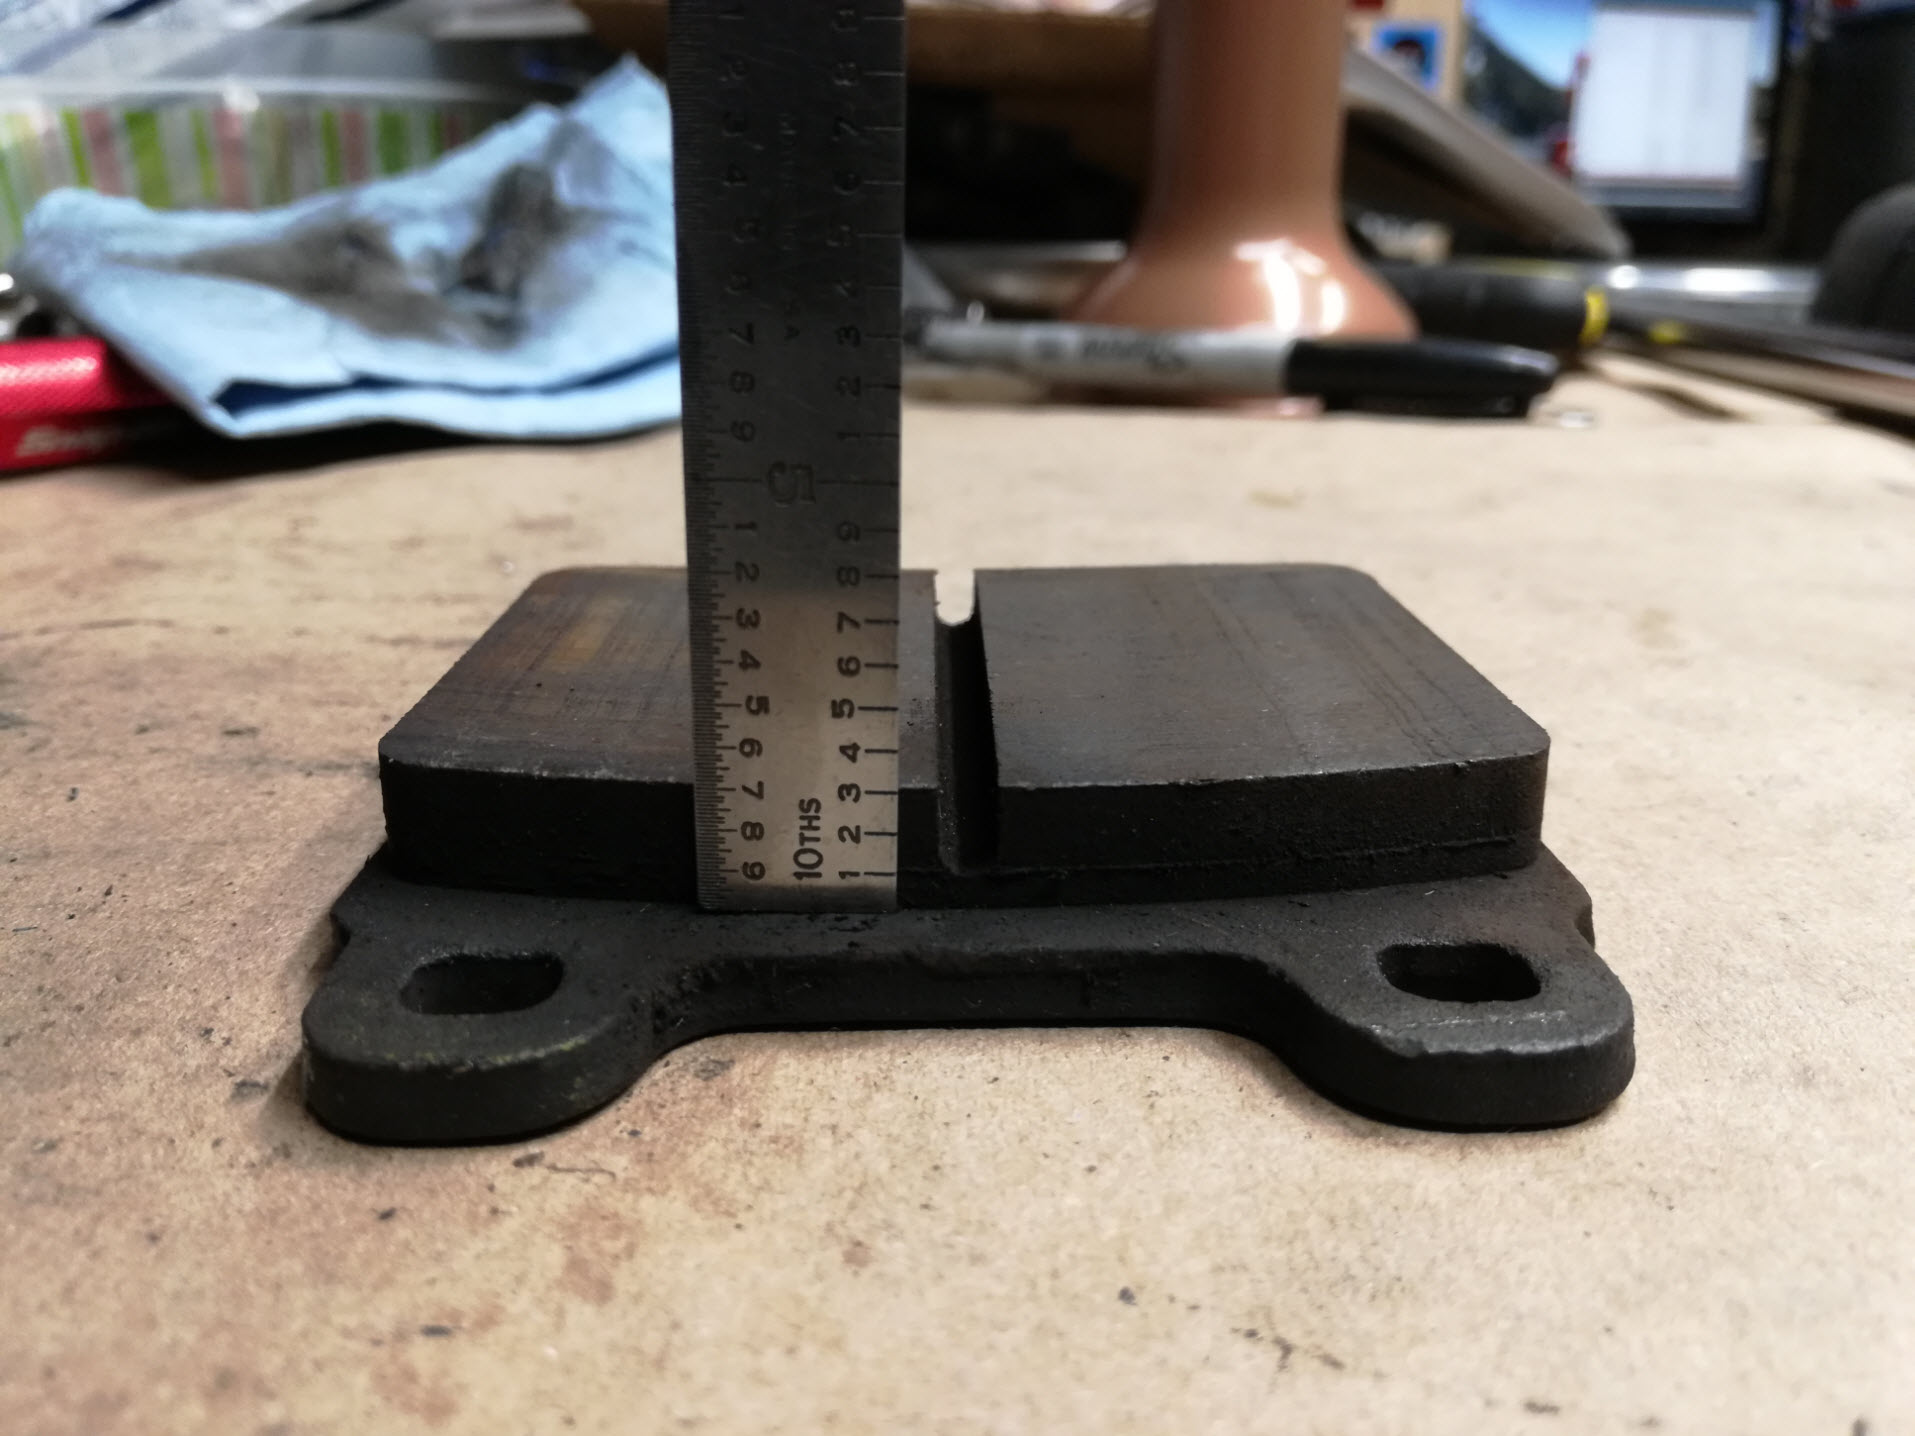 Air-cooled Porsche 911 brake pad material thickness.